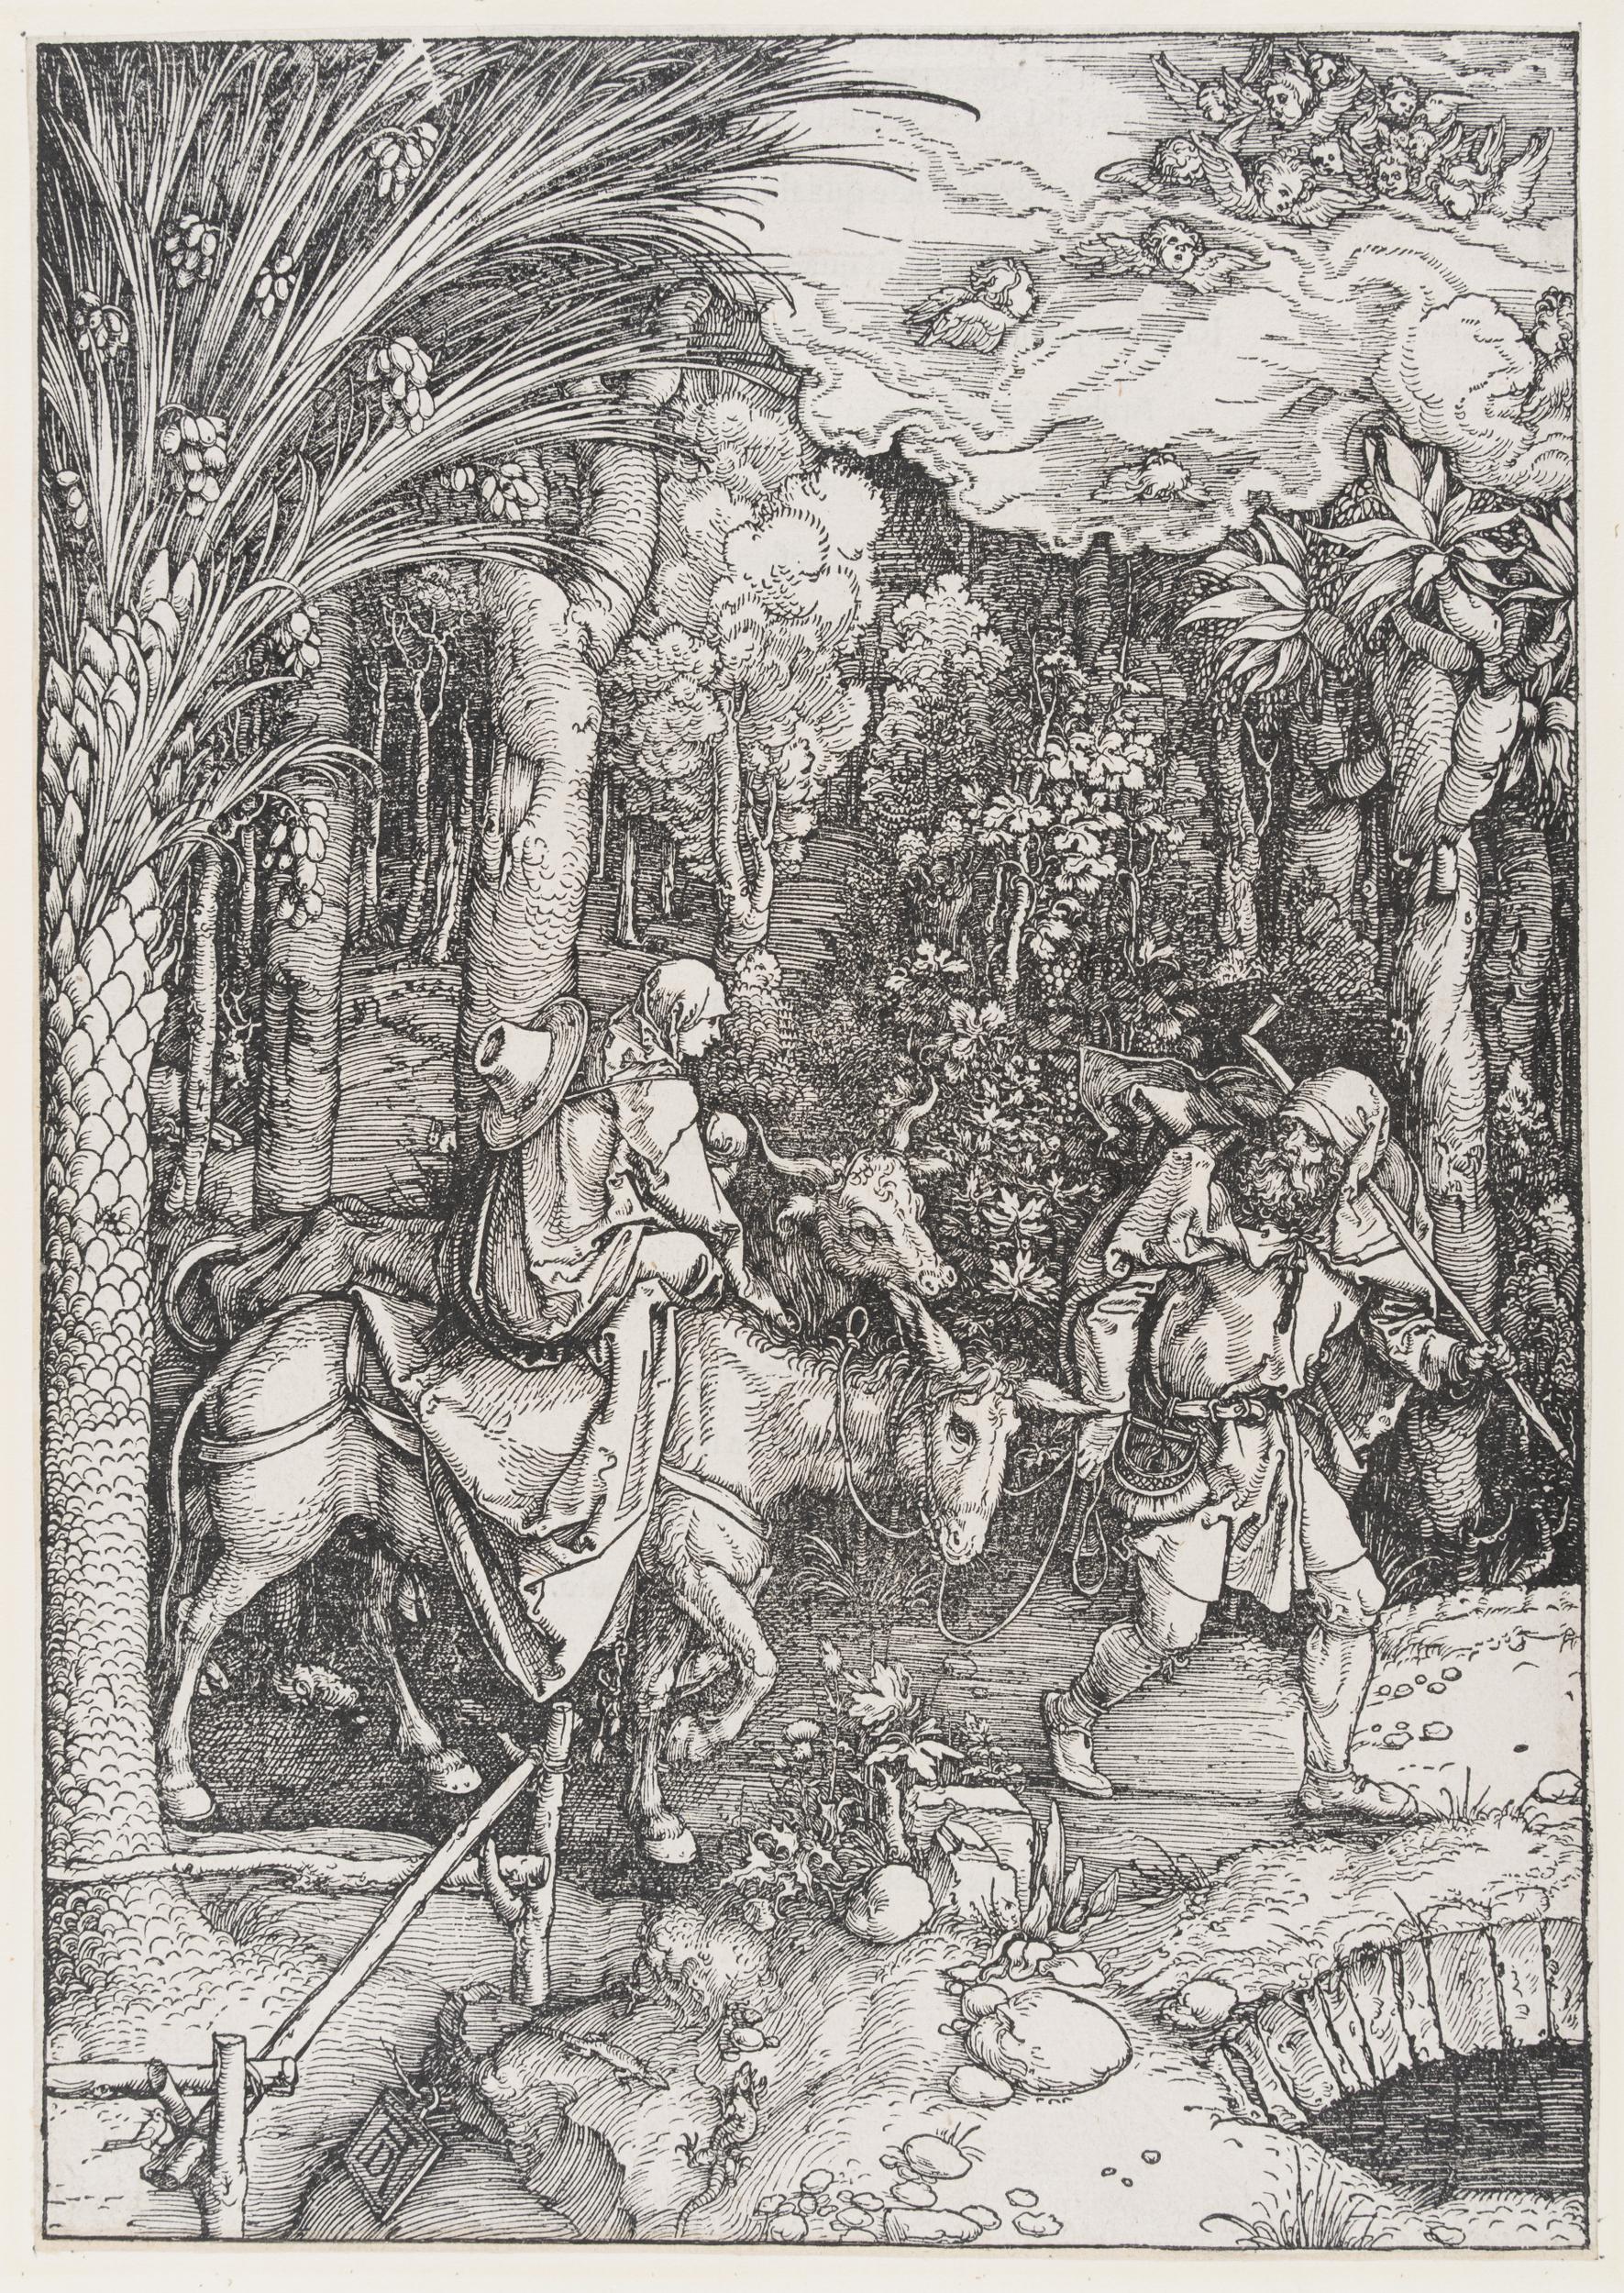 Old black and white sketch with man writing horse in woods